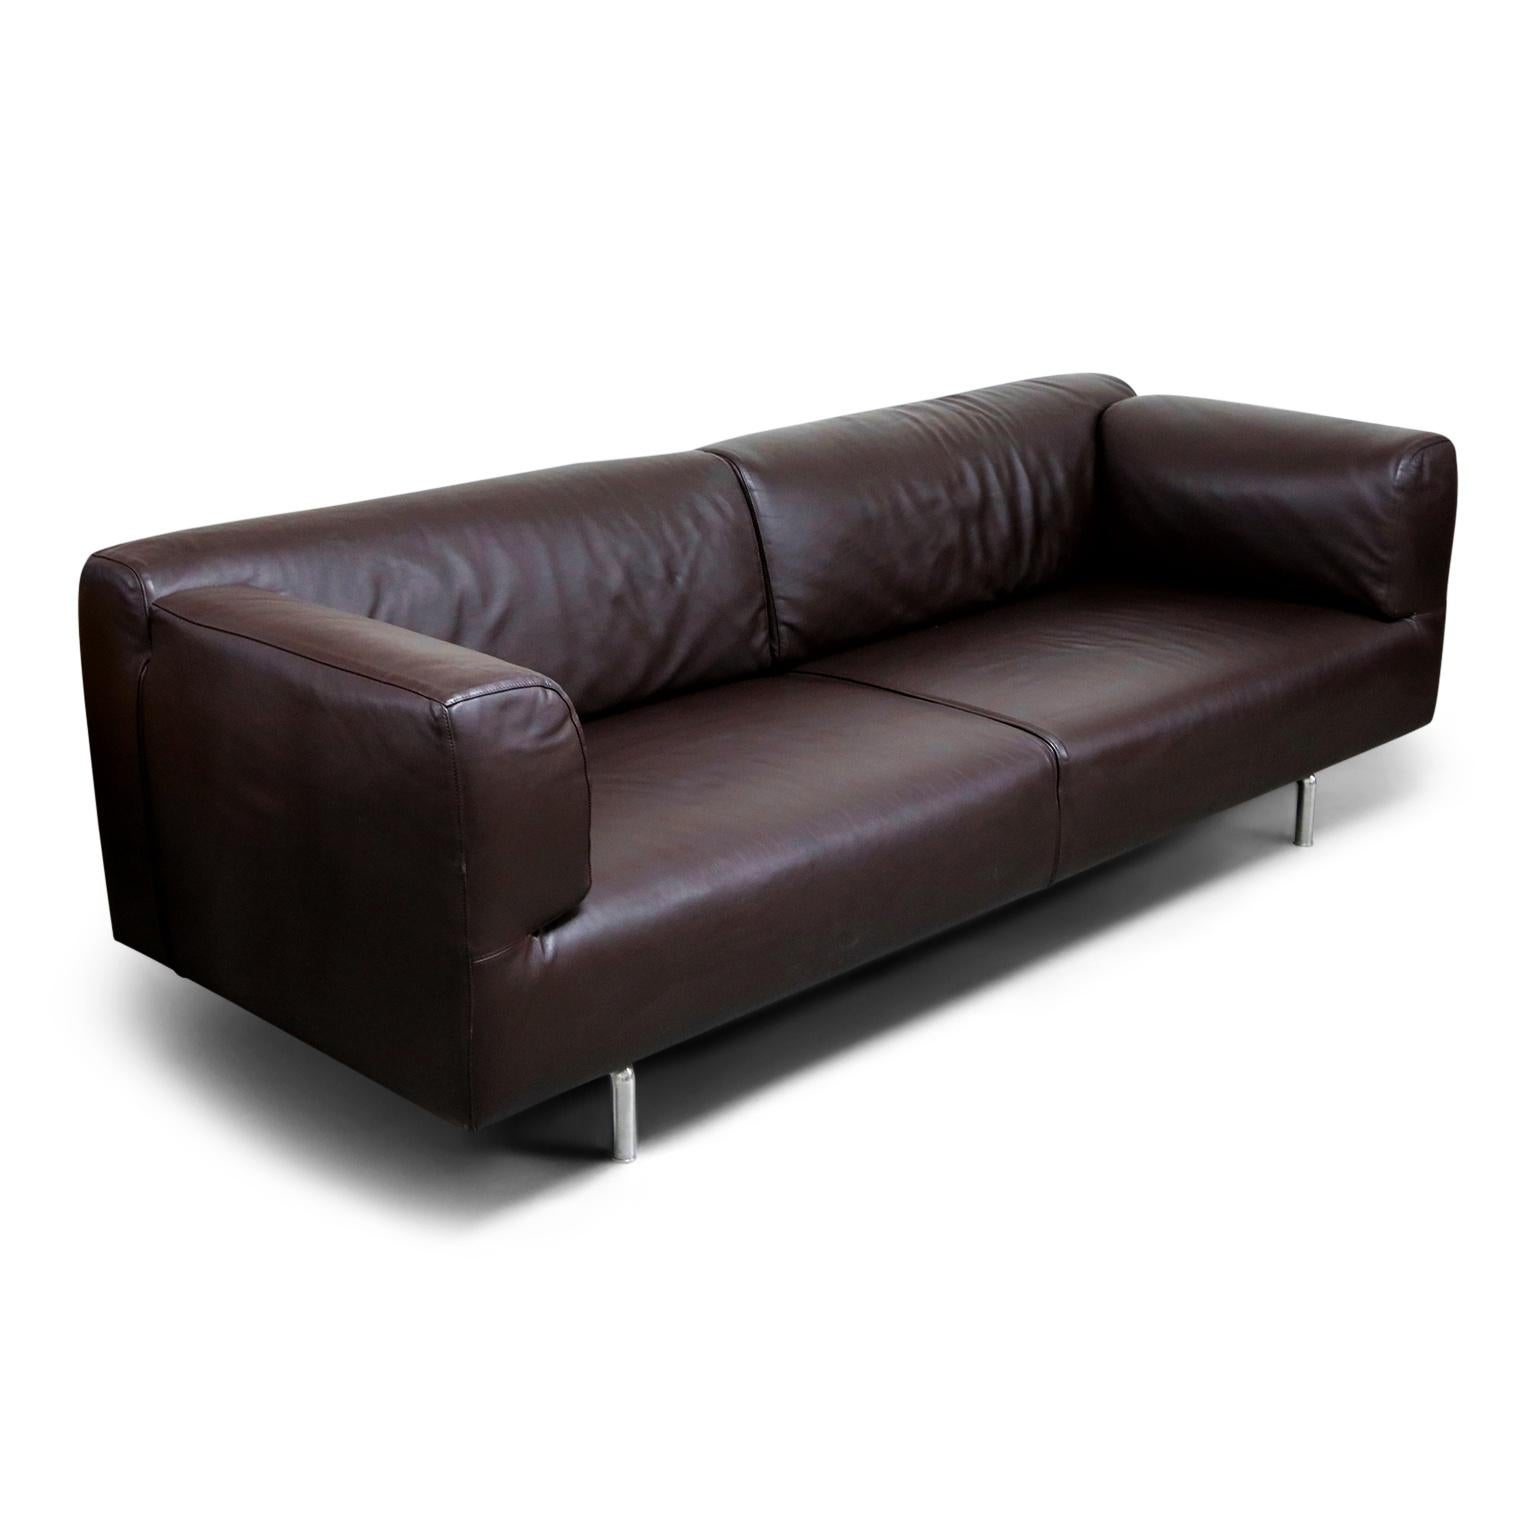 Italian '250 Met Two-Sofa' in Dark Brown Leather by Piero Lissoni for Cassina, Signed